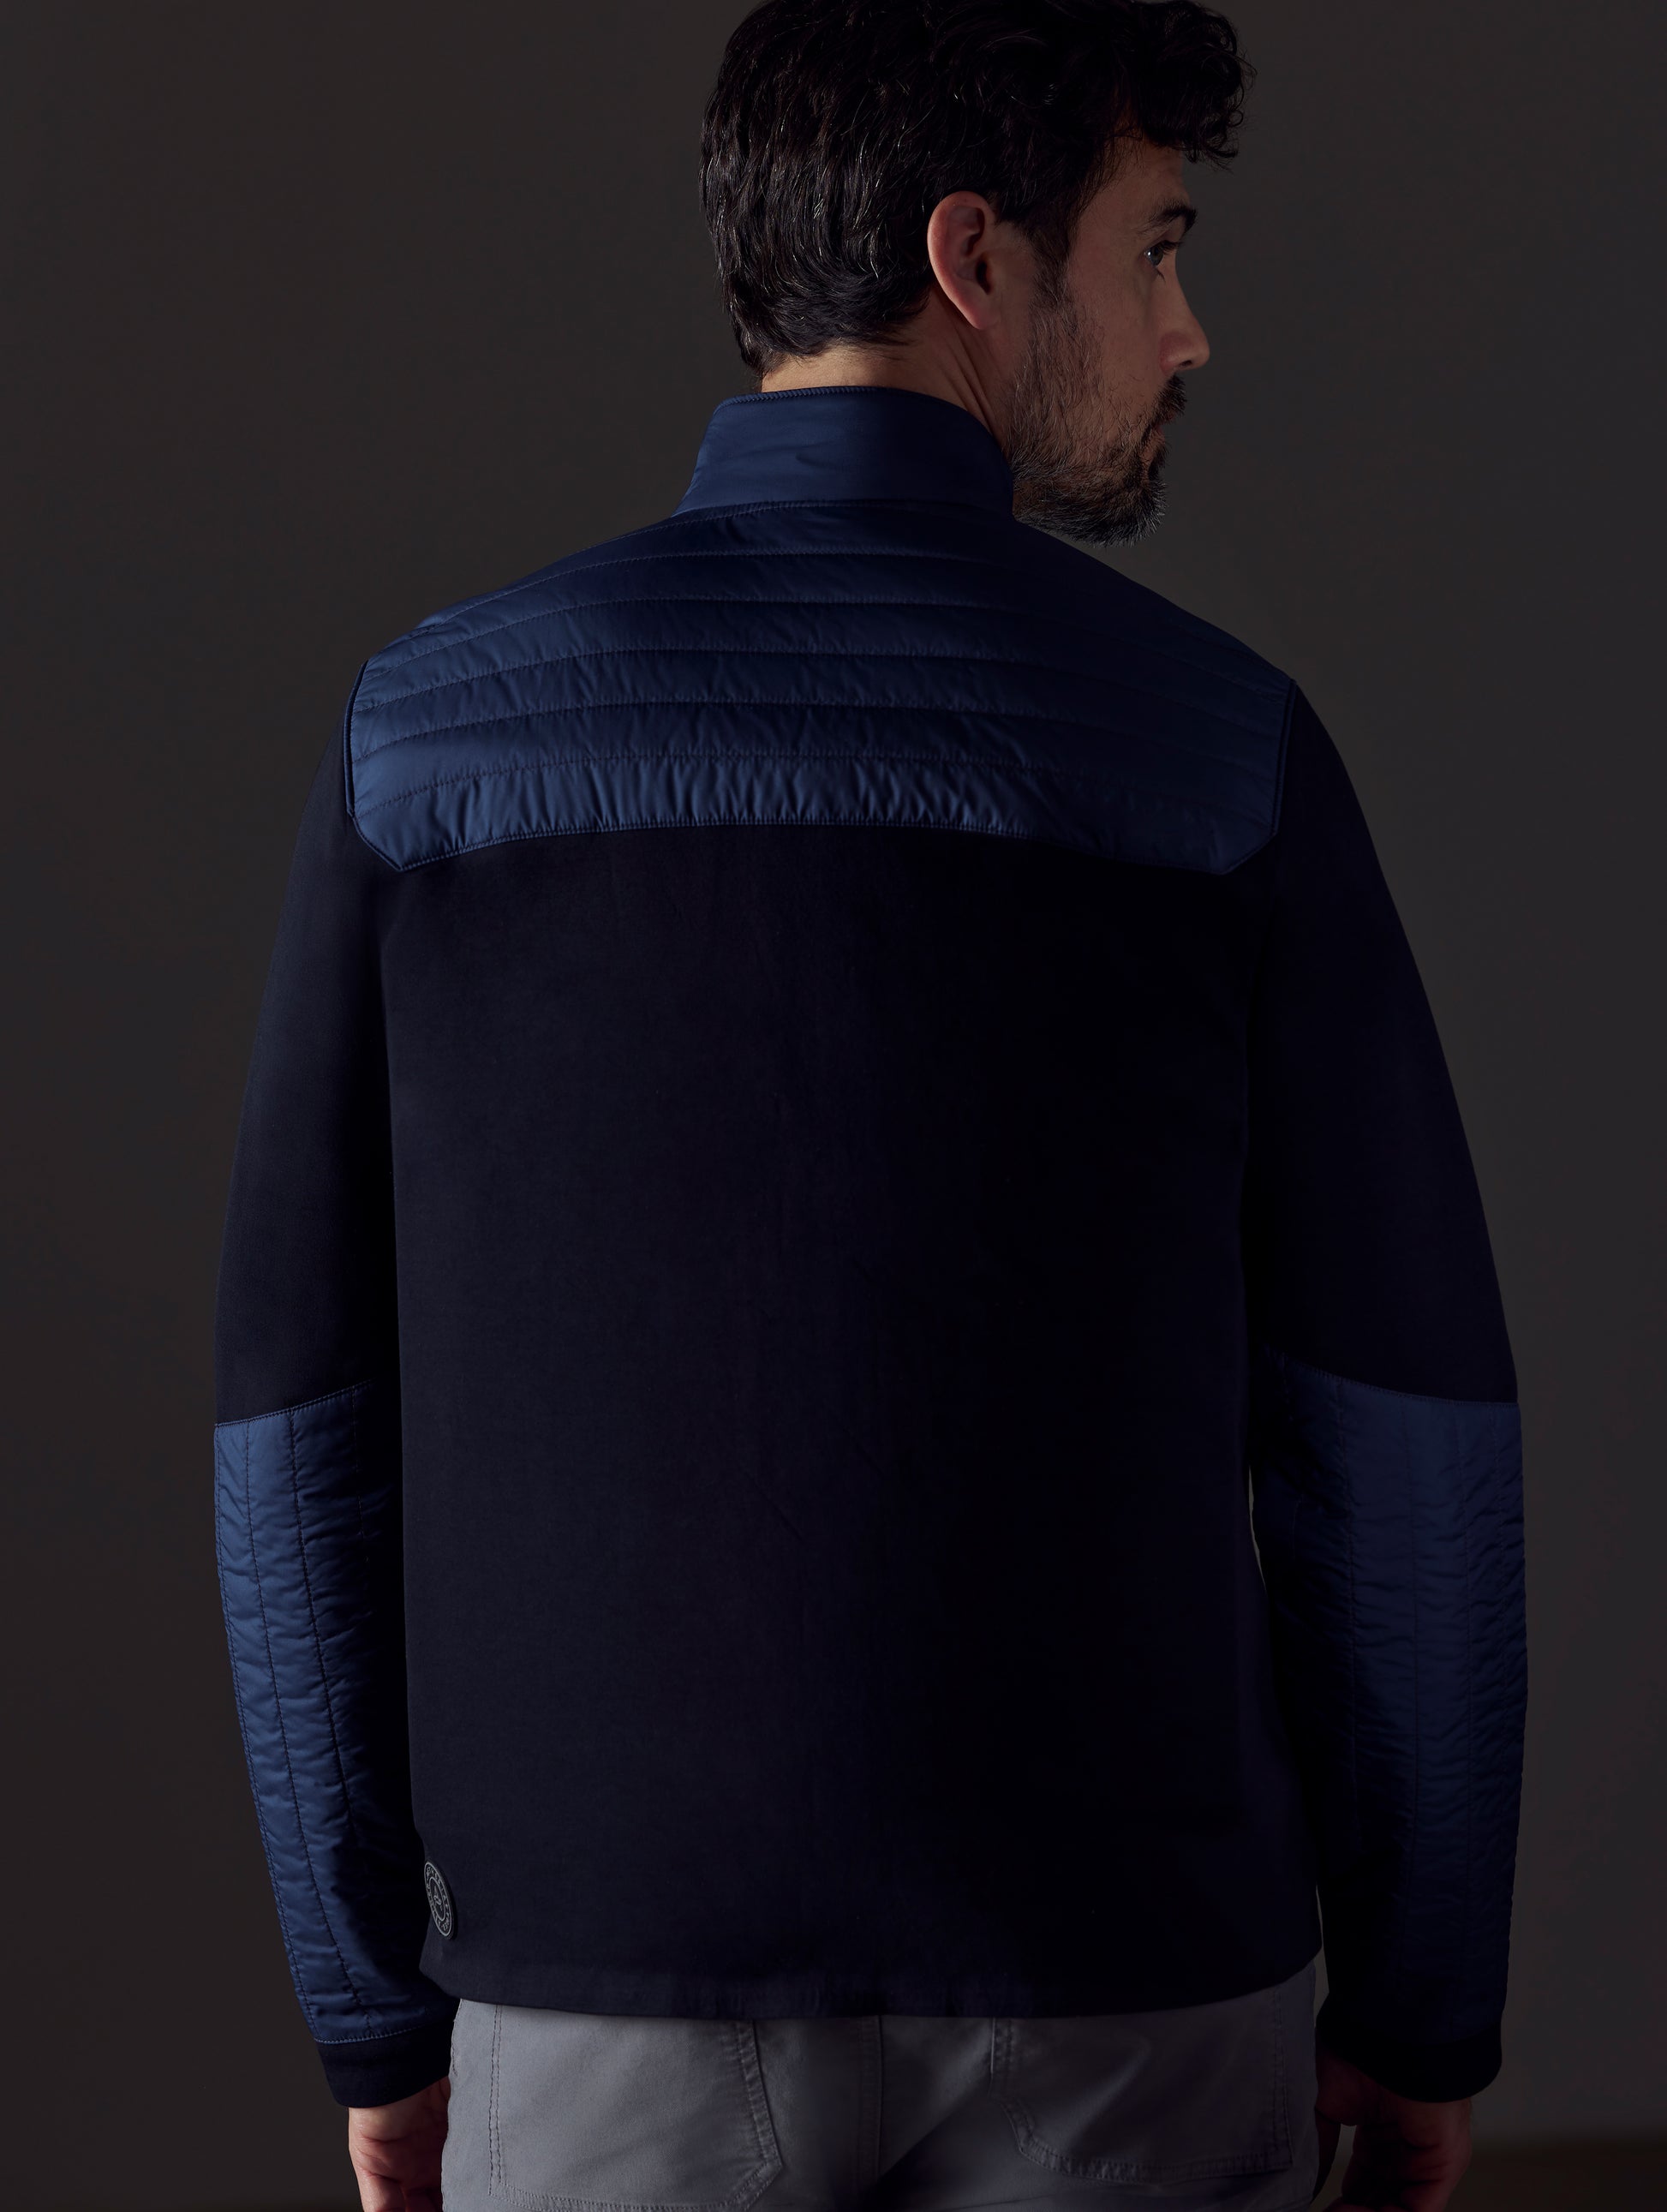 Back view of man wearing blue technical jacket from AETHER Apparel